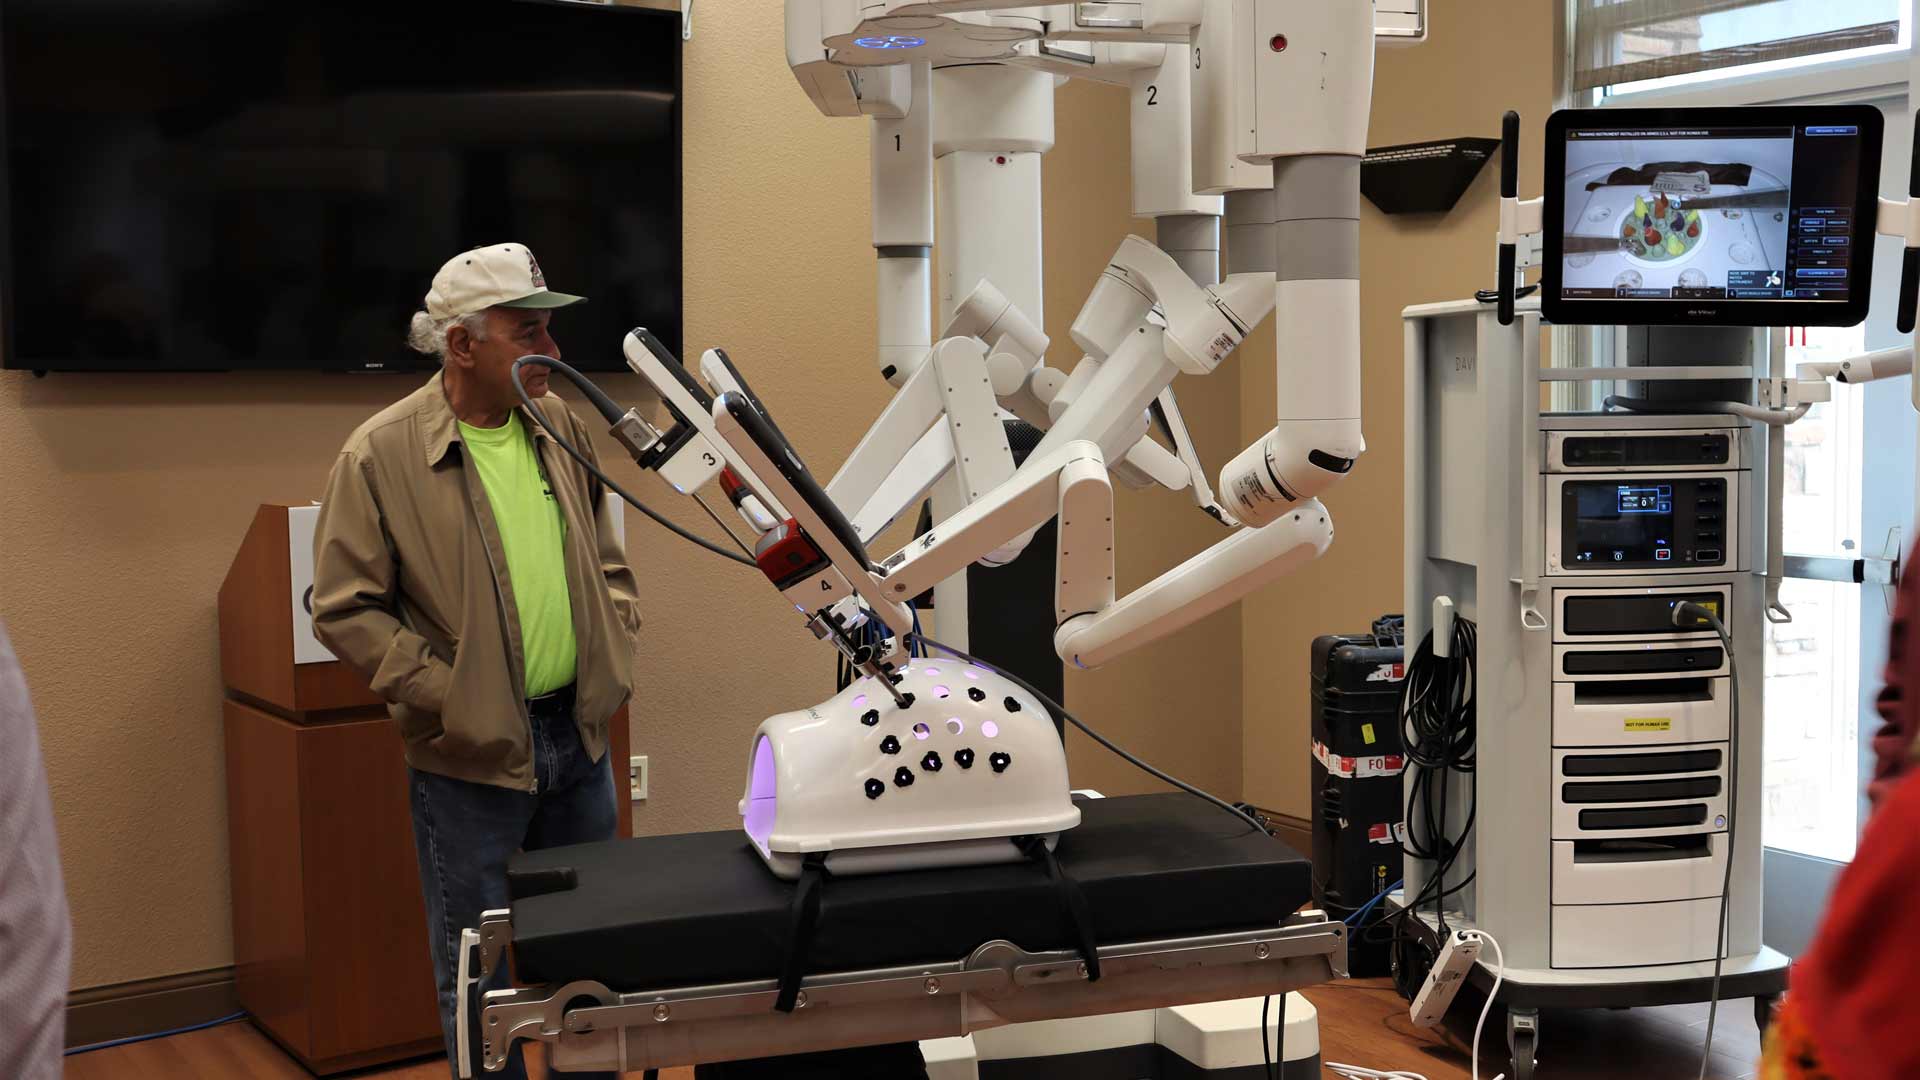 A Da Vinci Surgical Robot was purchased by Canyon Vista Medical Center to assist physicians during surgery.